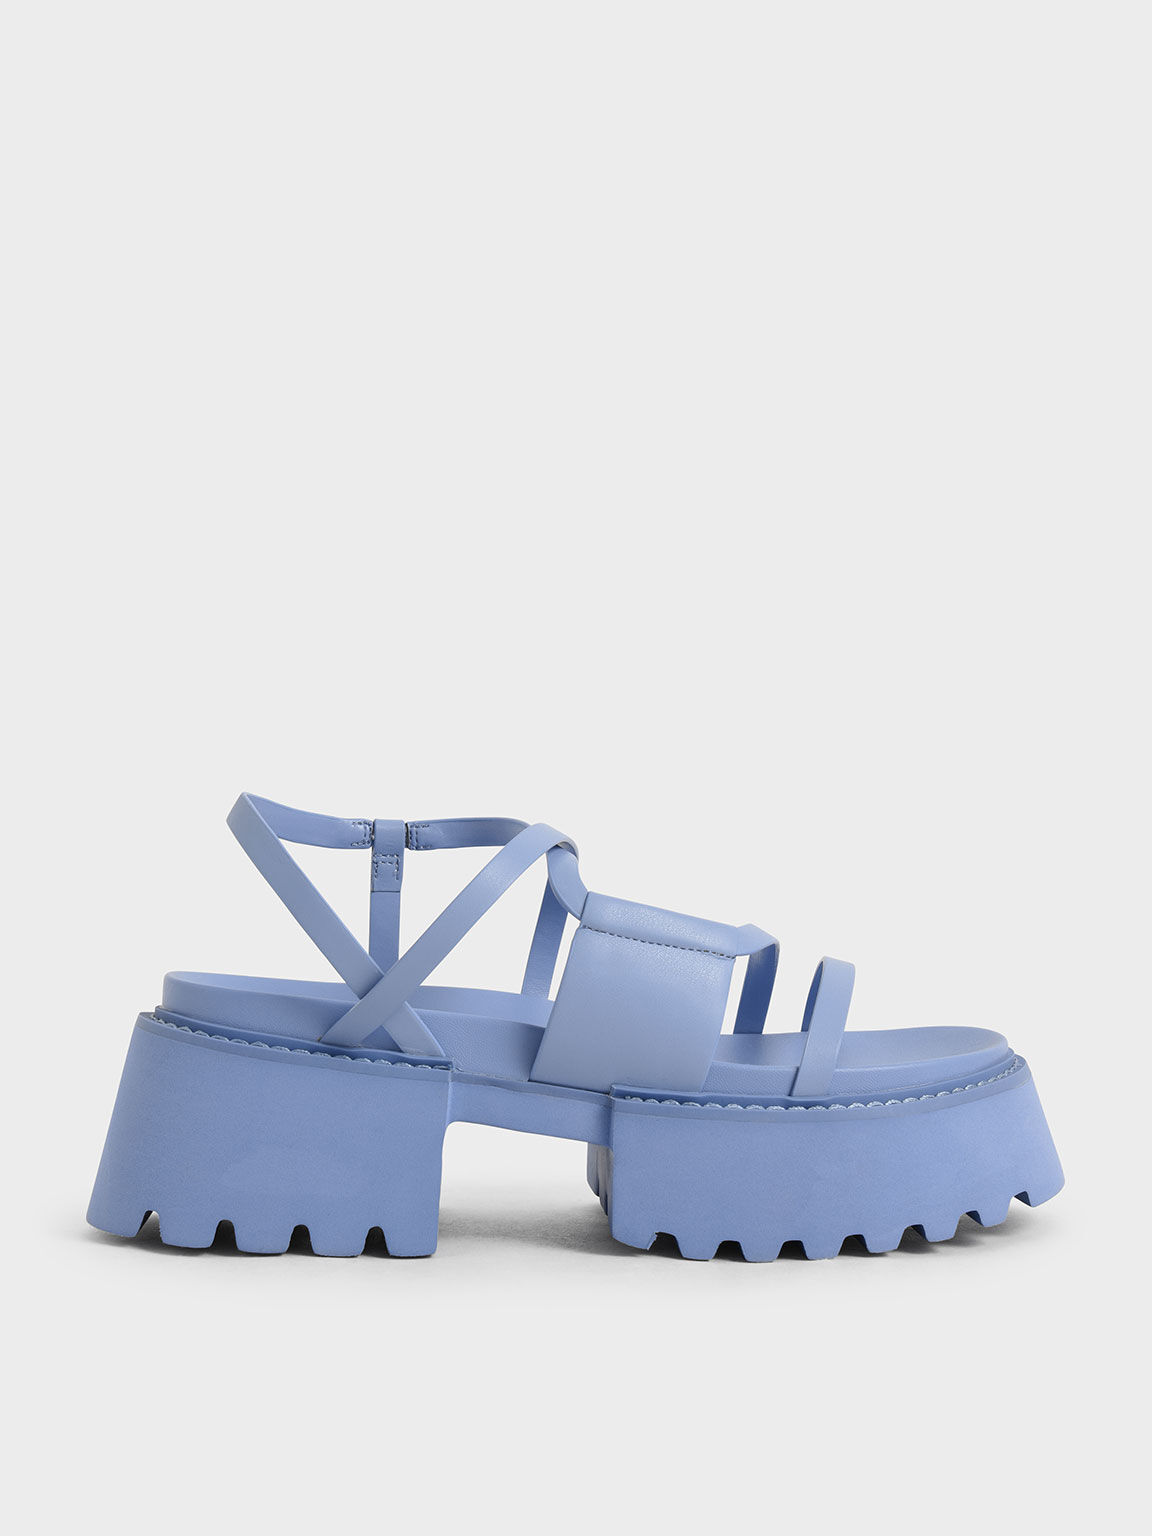 The Best Sandals To Shop For Summer 2023 - Chatelaine